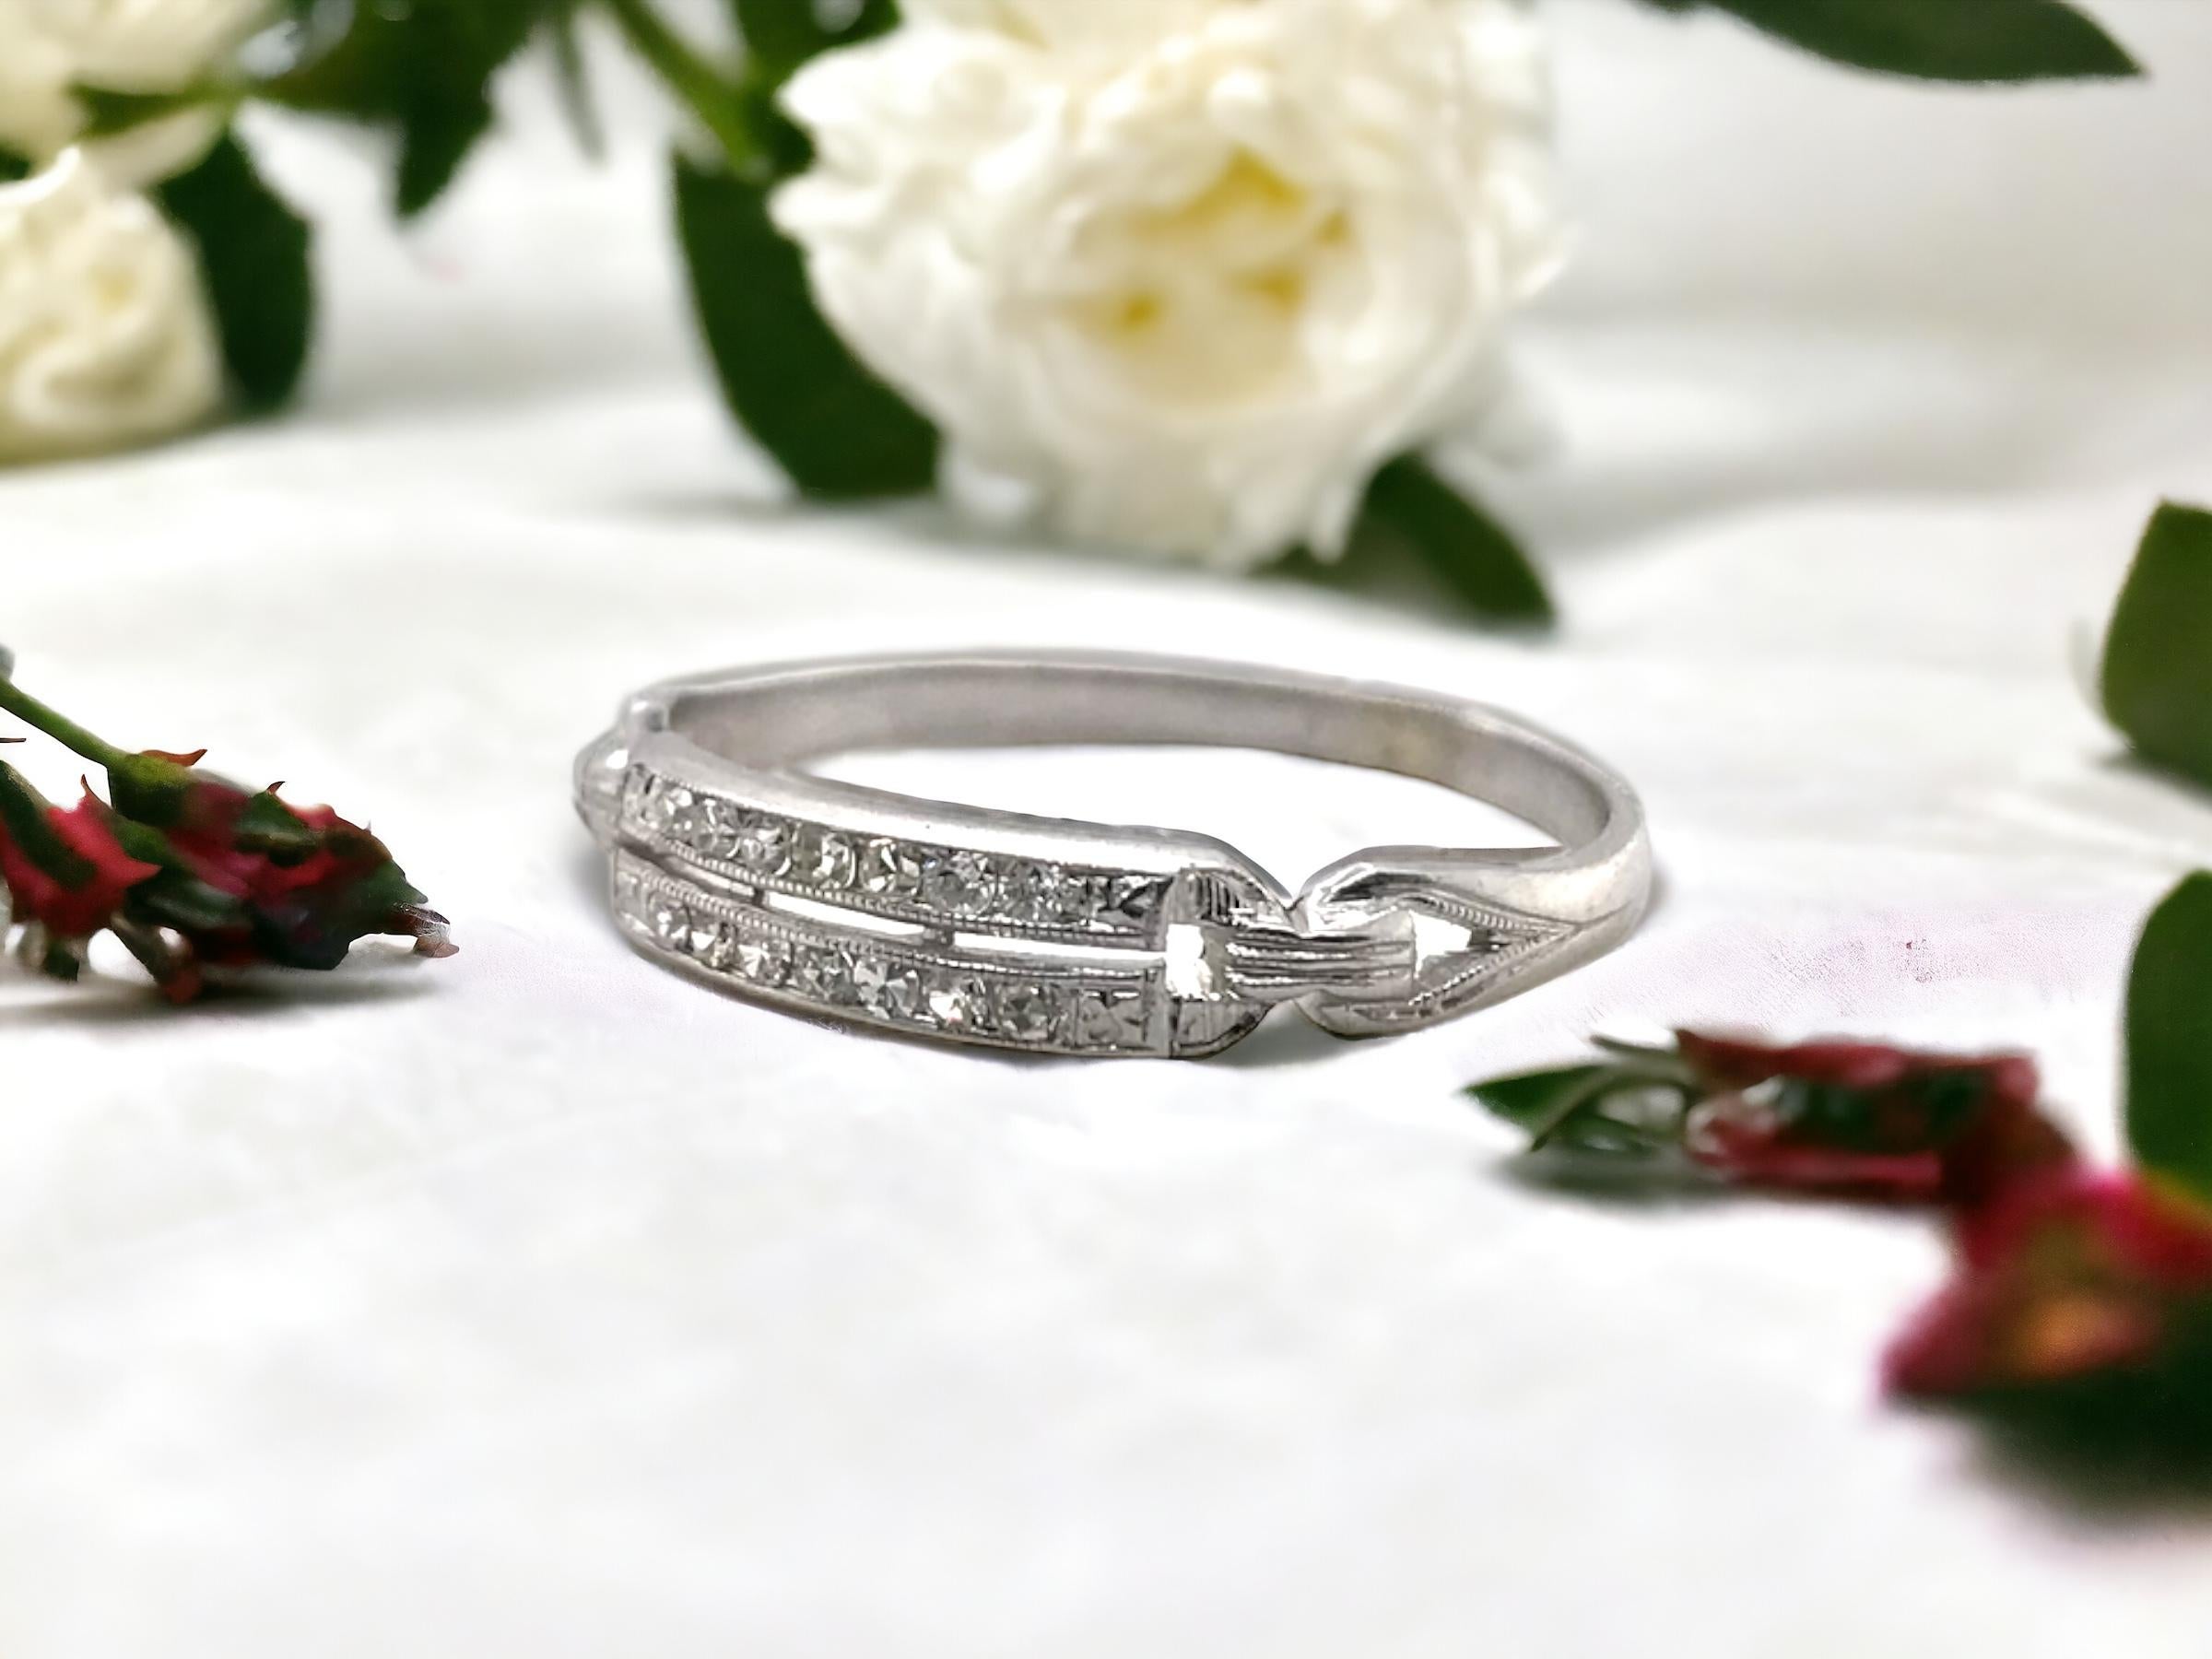 We are loving this dainty double row channel set band!
She is absolutely perfect to stack next to any vintage ring.

Ring Details
Material: Platinum
Era: Art Deco 1910 - 1930
Weight: 1.4 Grams
Width: 3.6mm
Height:1.45mm
Finger Size: 7
Sizable Upon